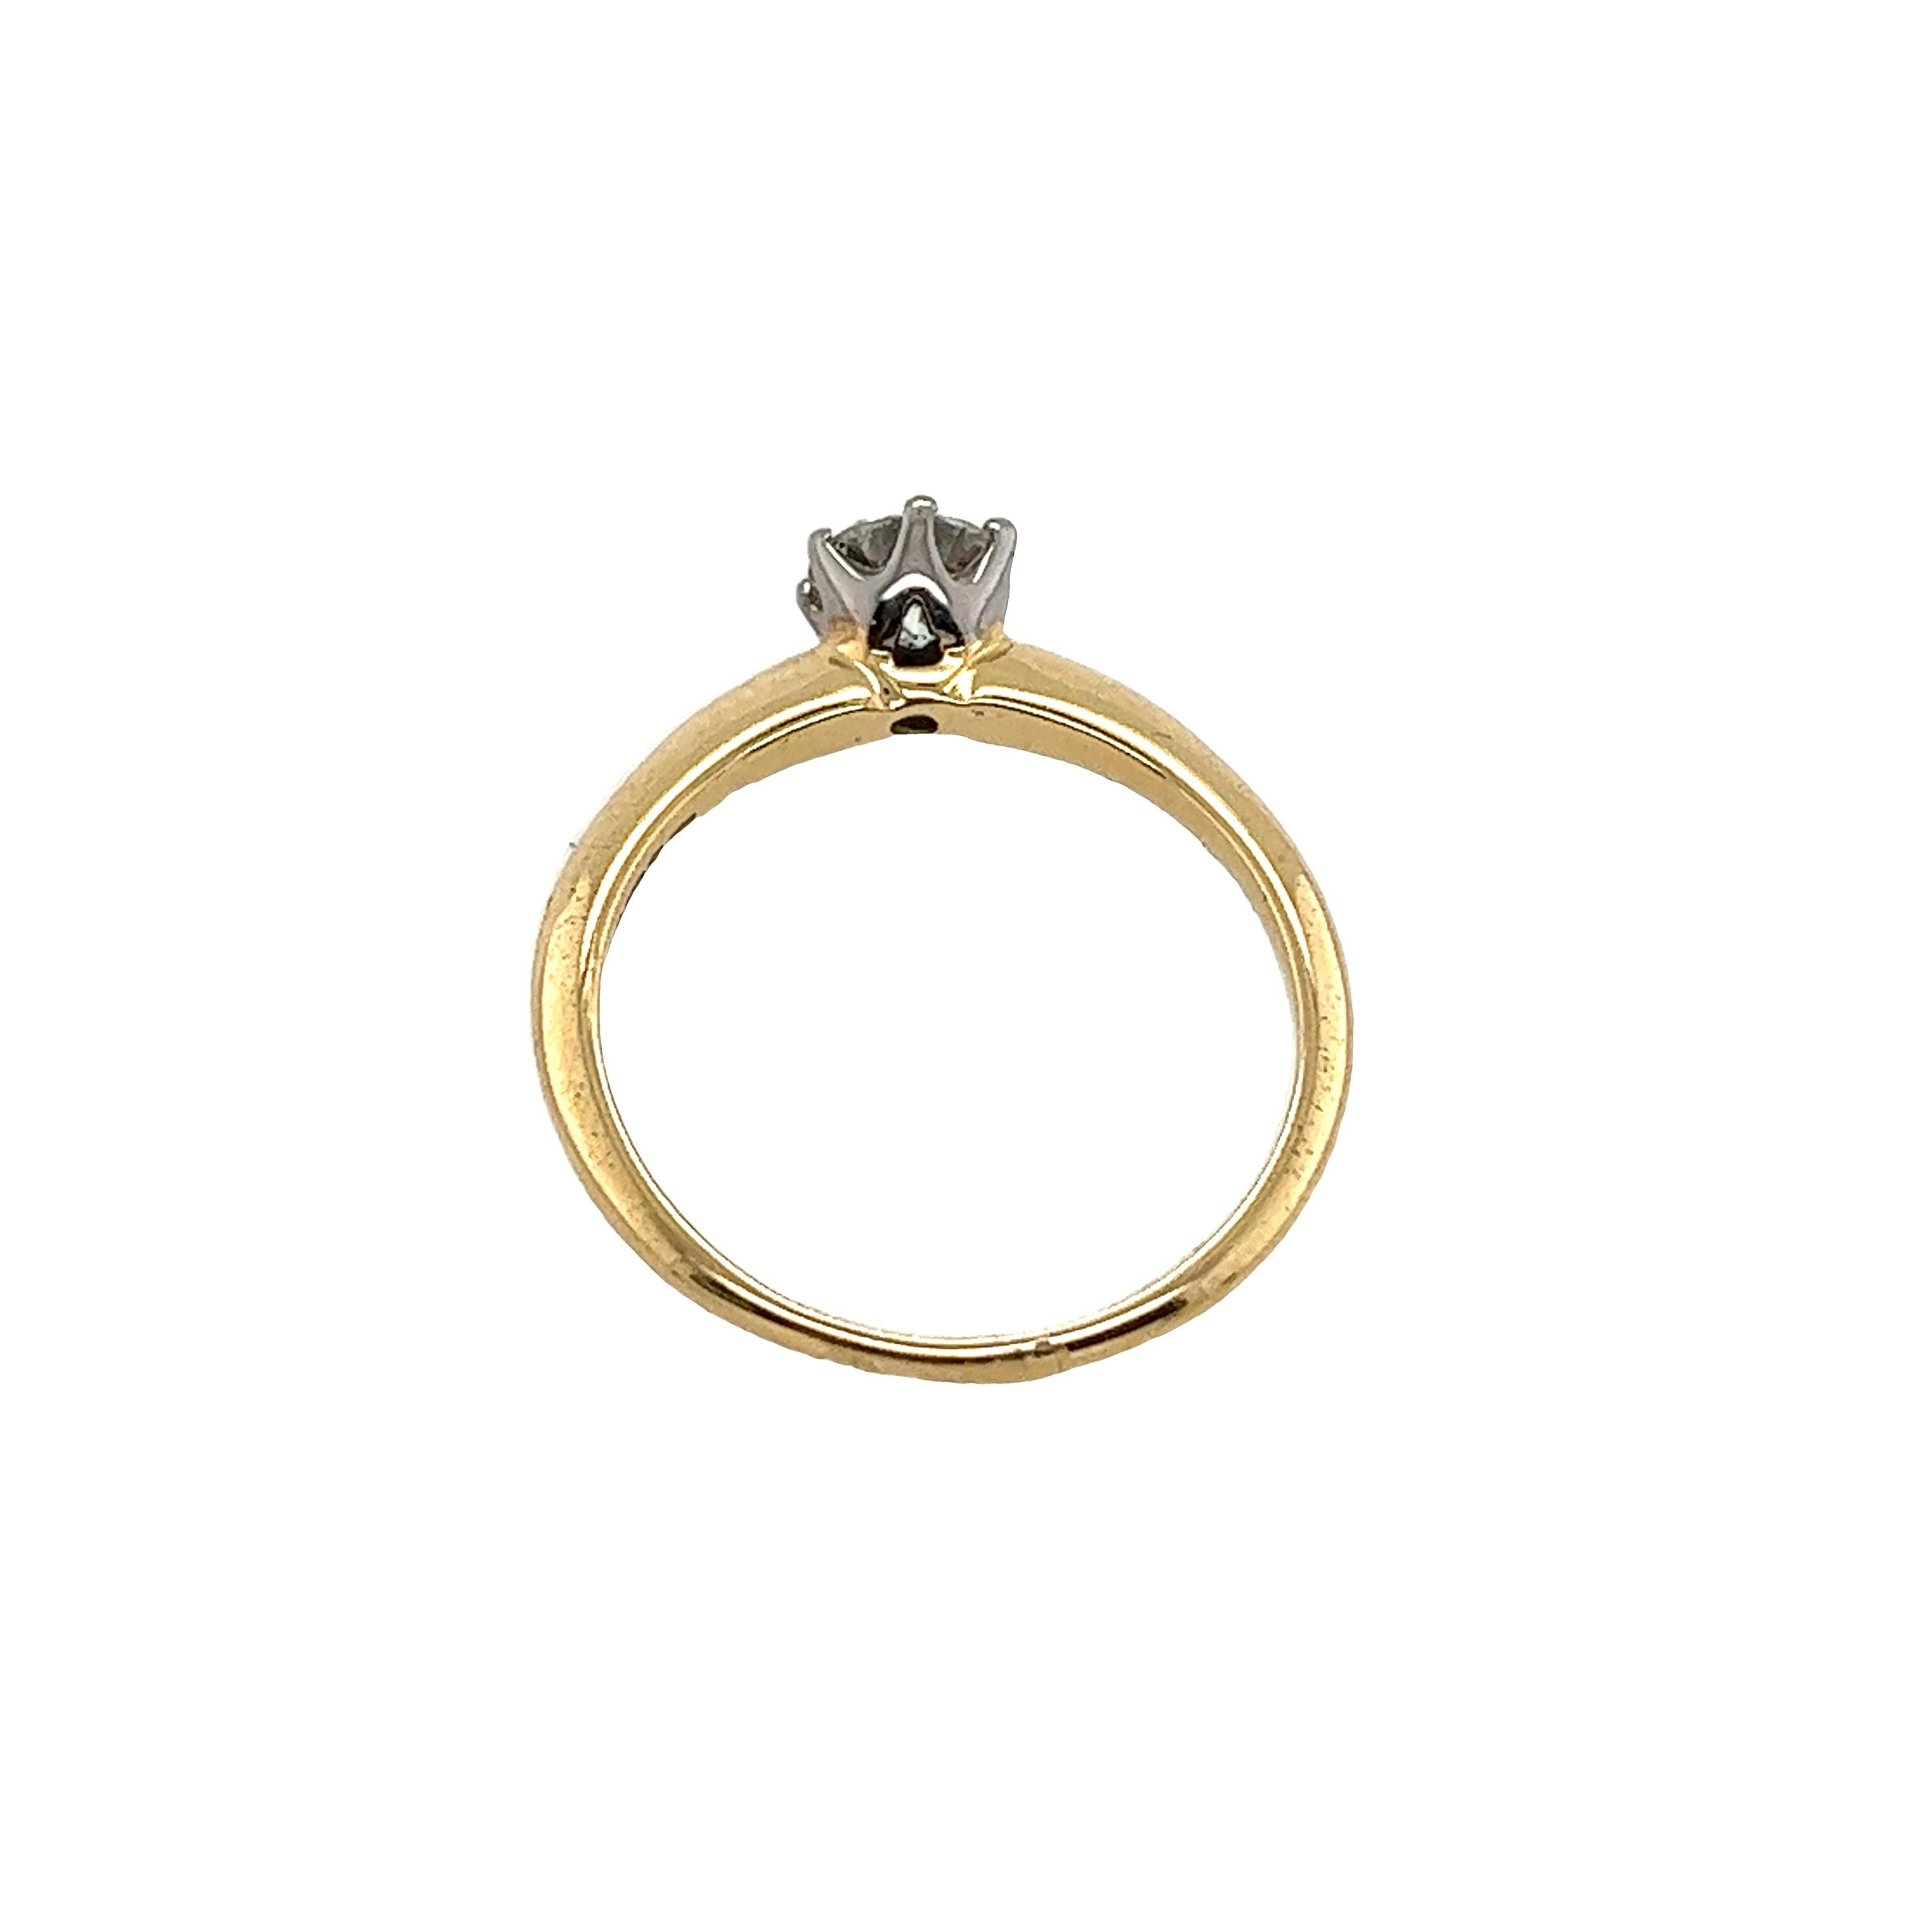 A beautiful 18ct Yellow & White Gold solitaire Diamond ring, set with a 0.50ct Round brilliant cut Diamond. This engagement ring is a perfect symbol of your commitment to love.

Additional Information: 
Total Diamond Weight: 0.50ct
Diamond Colour: